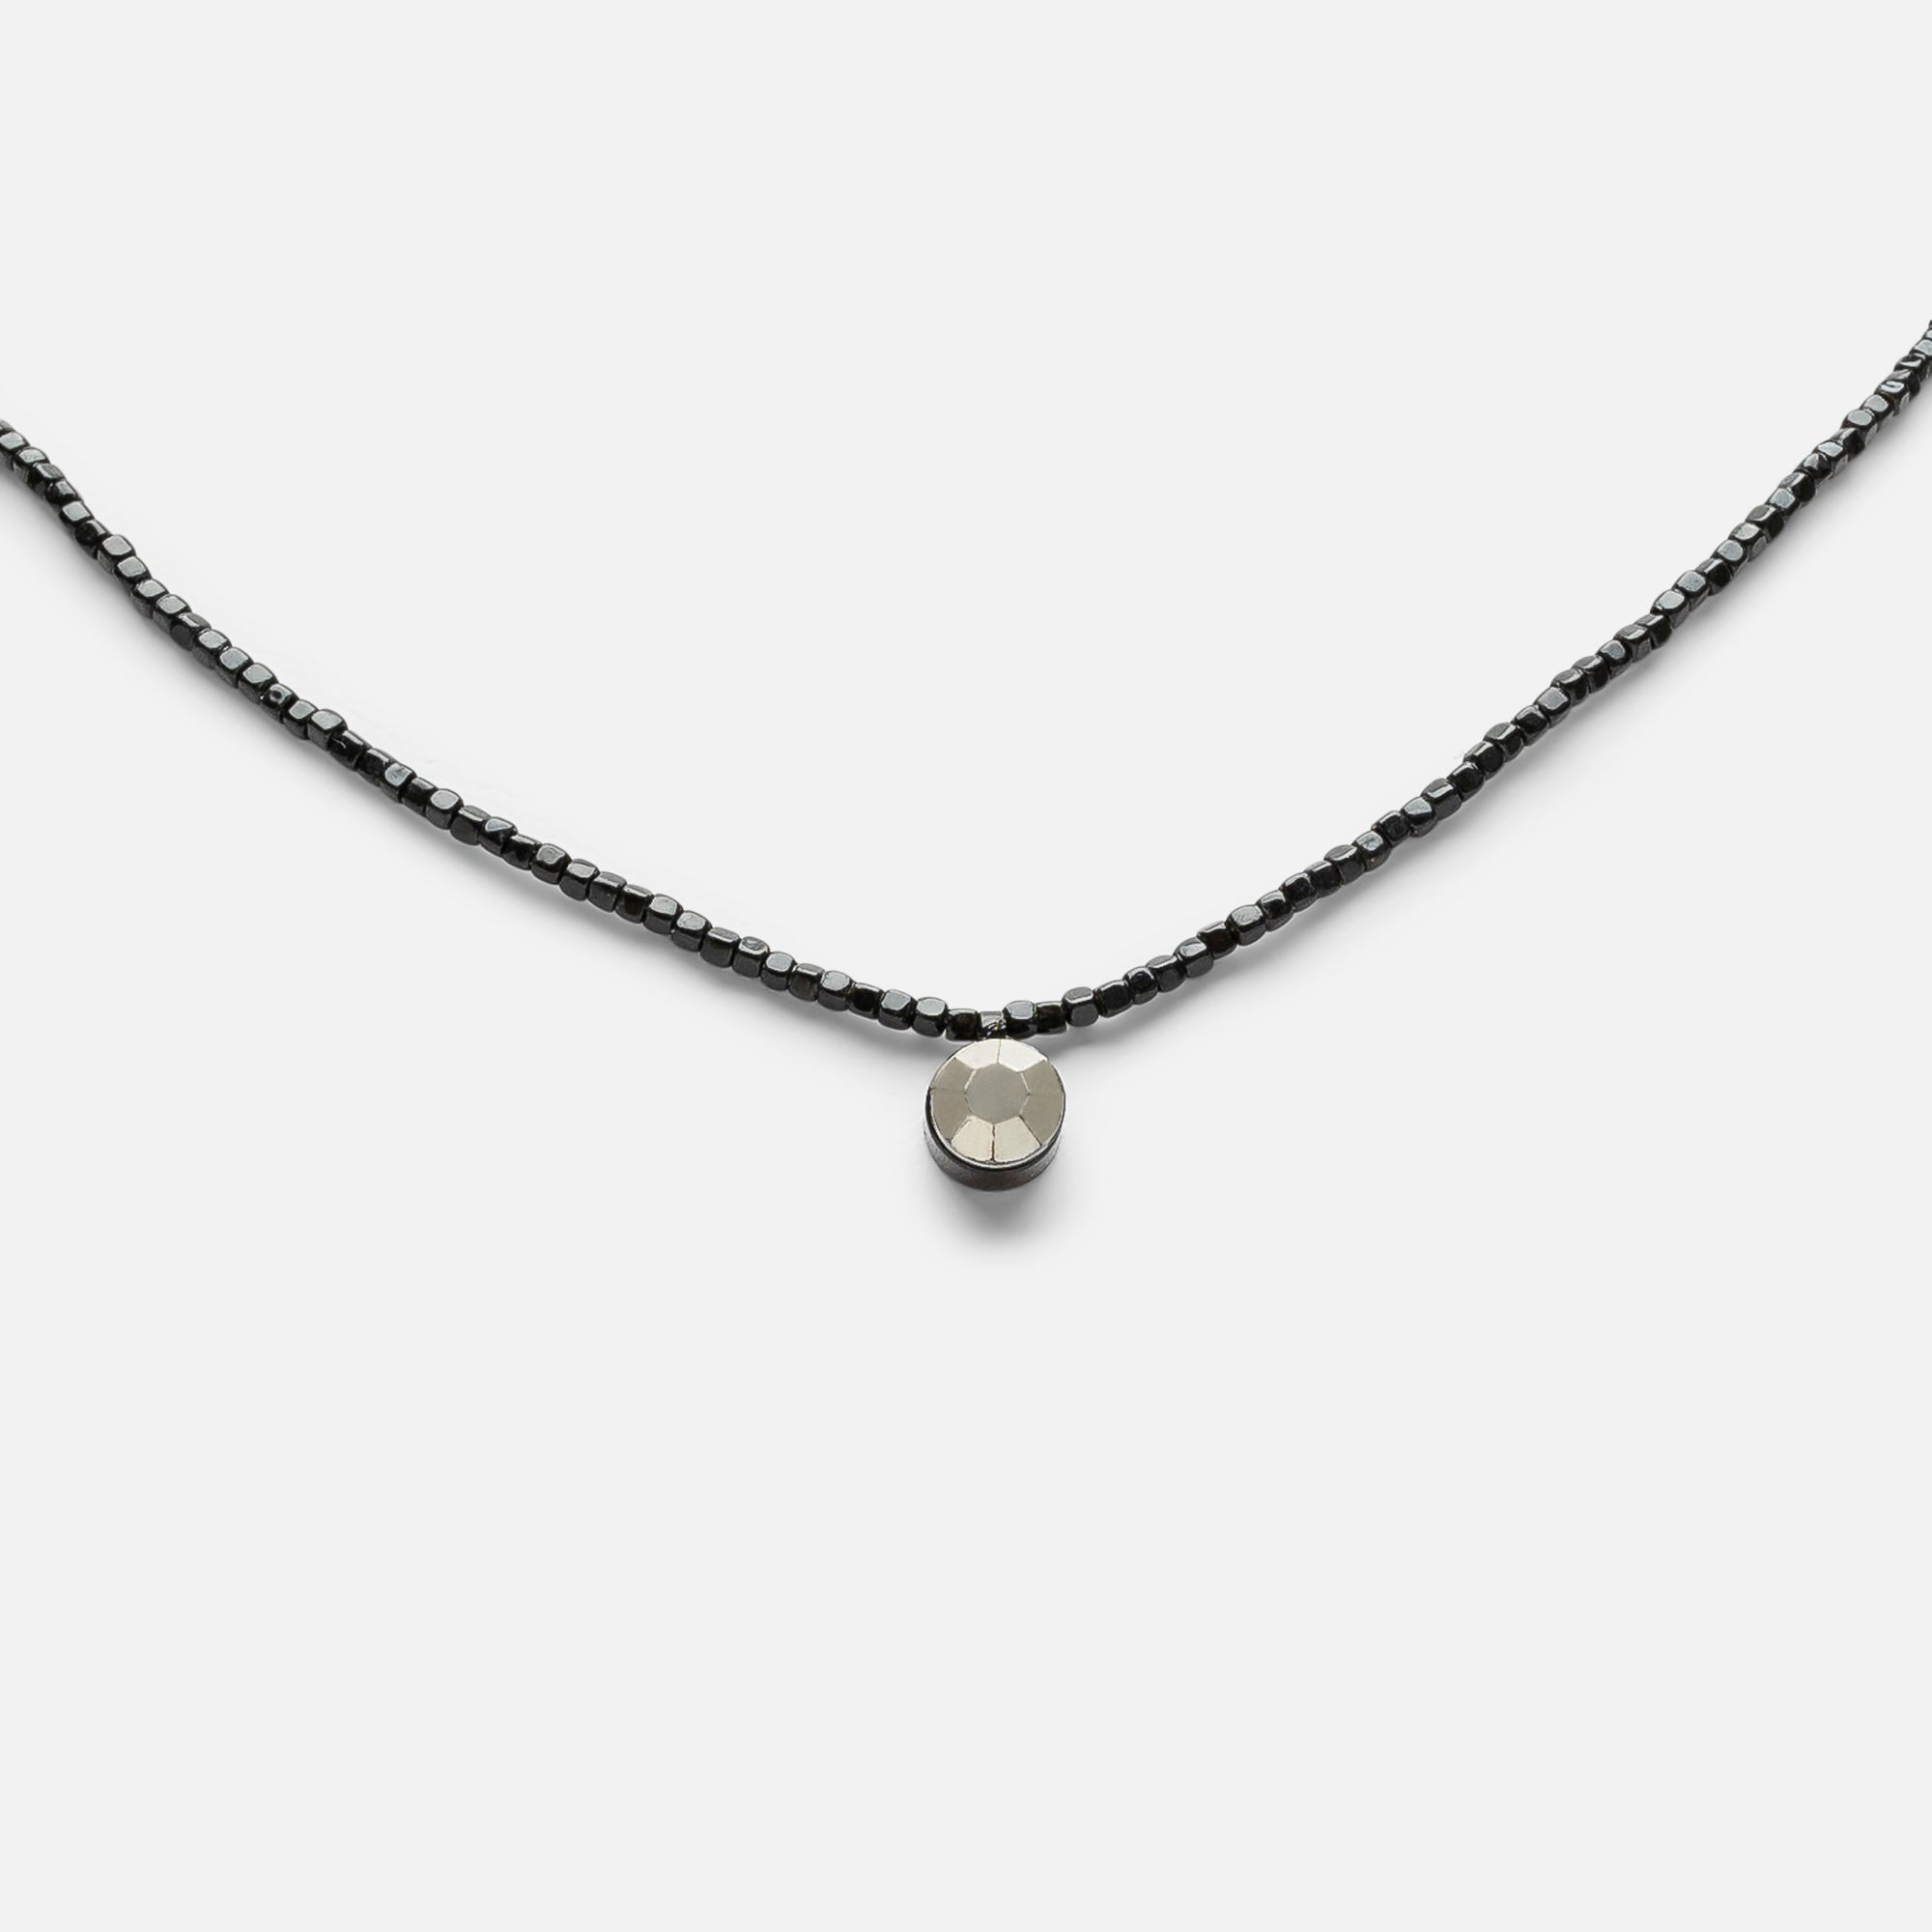 Short black bead necklace with pendant